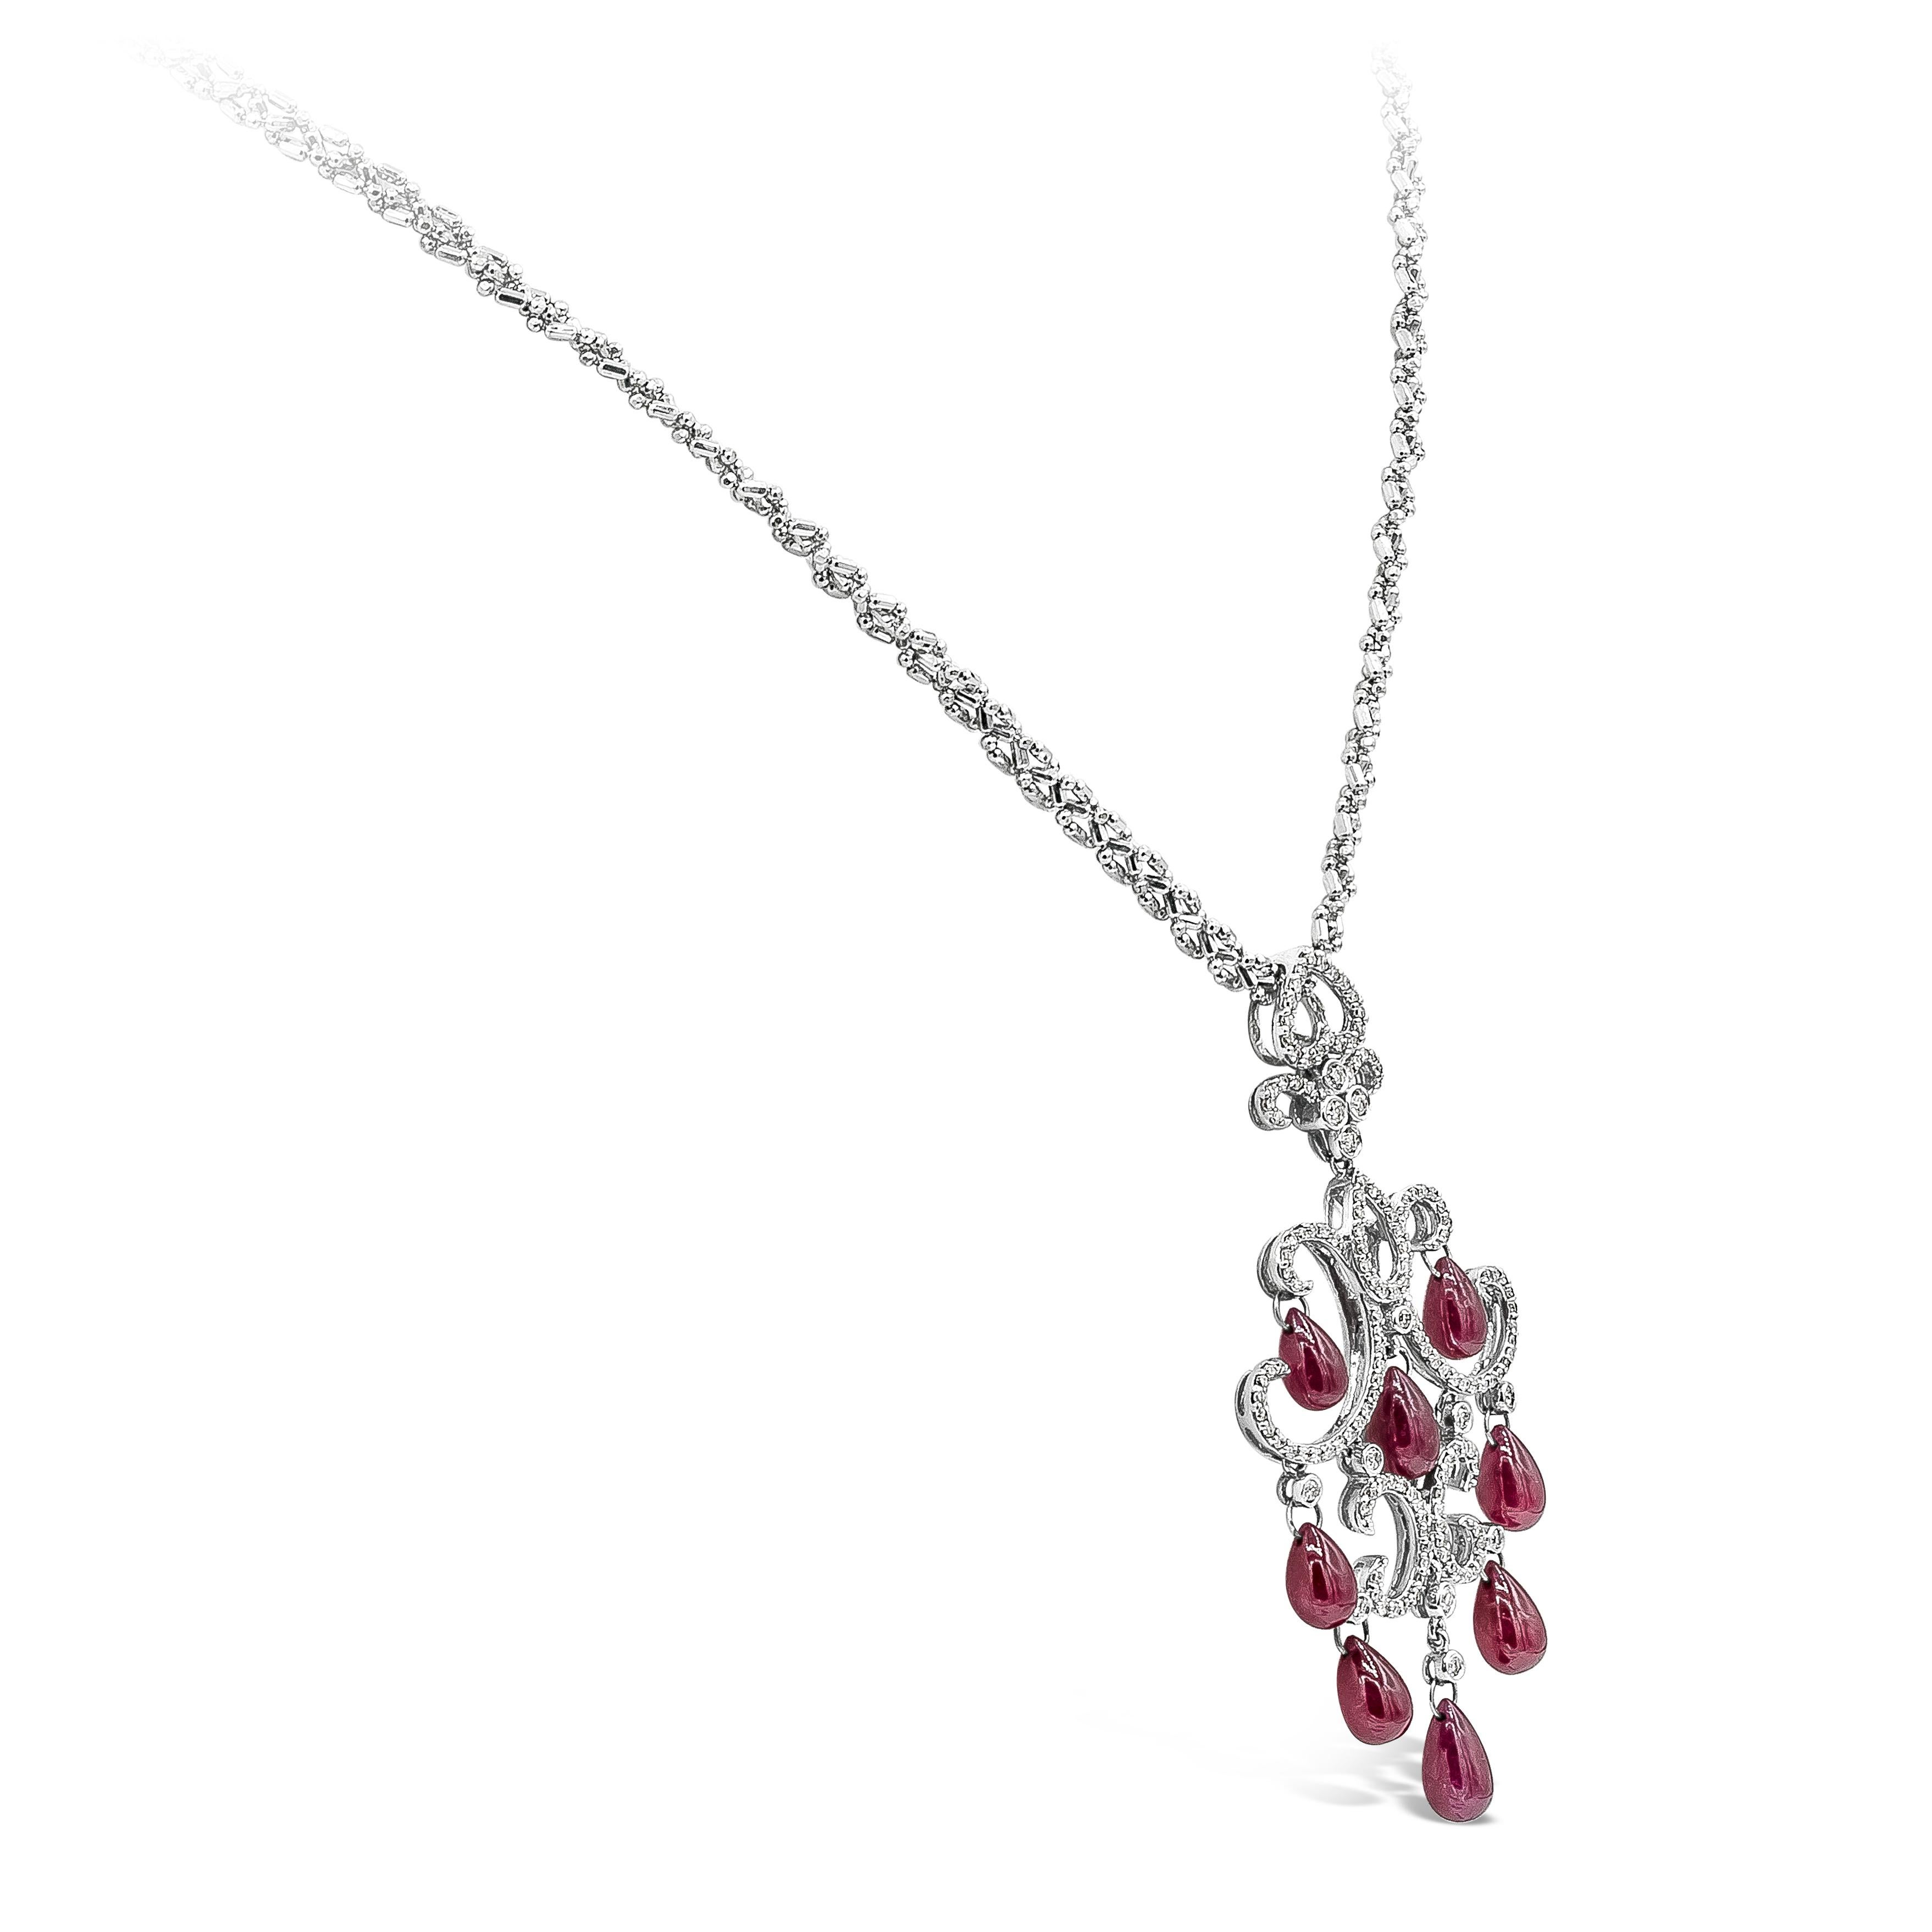 An intricately designed chandelier necklace, featuring color-rich ruby briolettes weighing 16.25 carats total. Accented with round brilliant cut diamonds weighing 0.80 carats total. The pendant is 2.5 inches, and the chain is 19 inches long. Made in